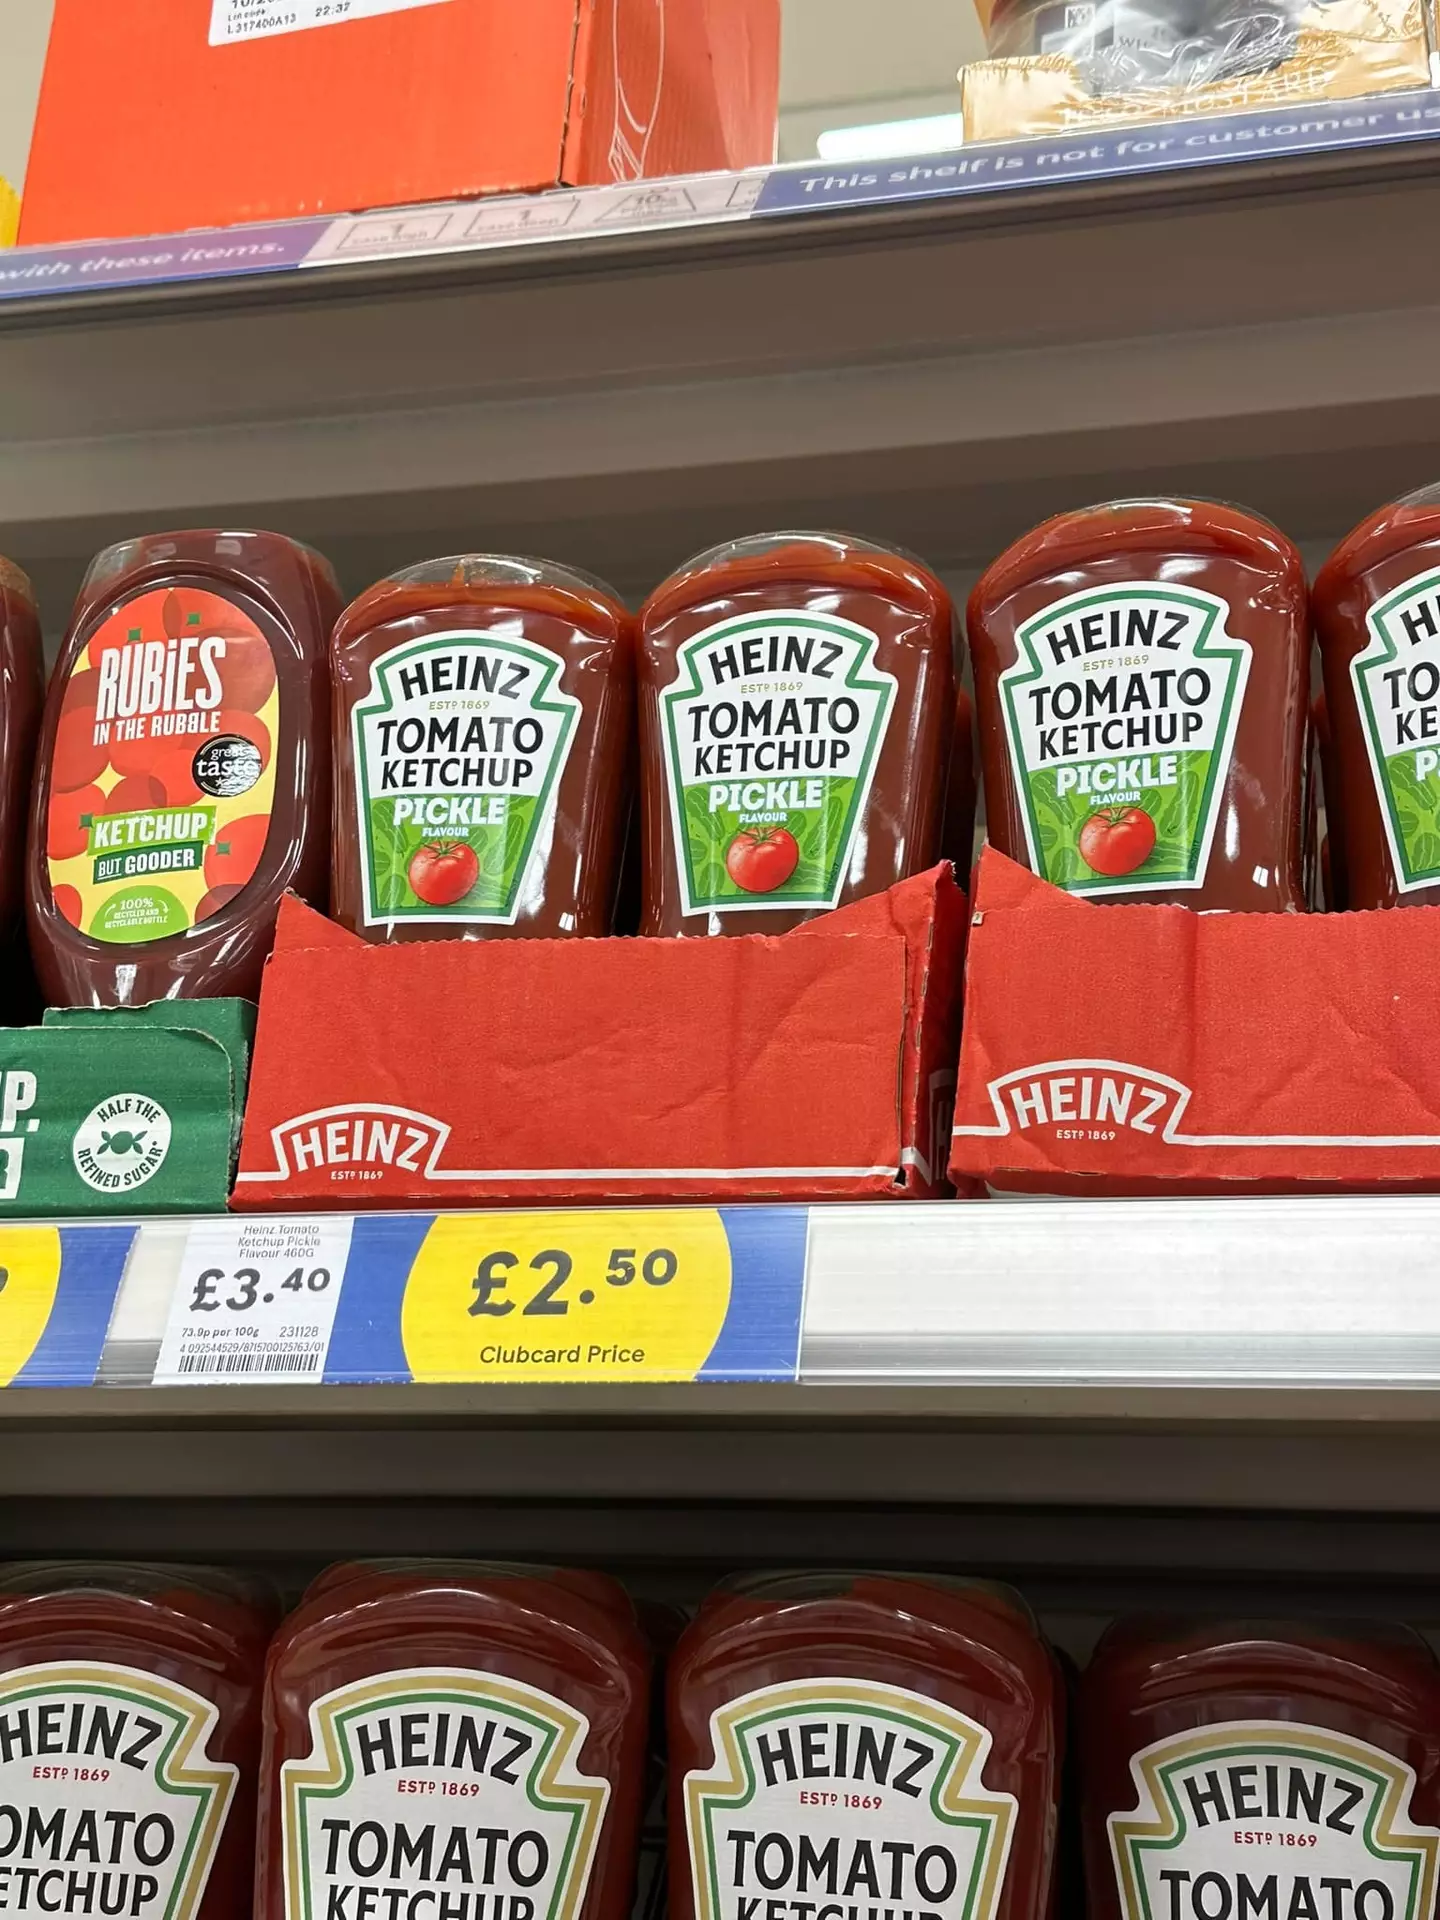 The new sauce was spotted by shoppers in Tesco.